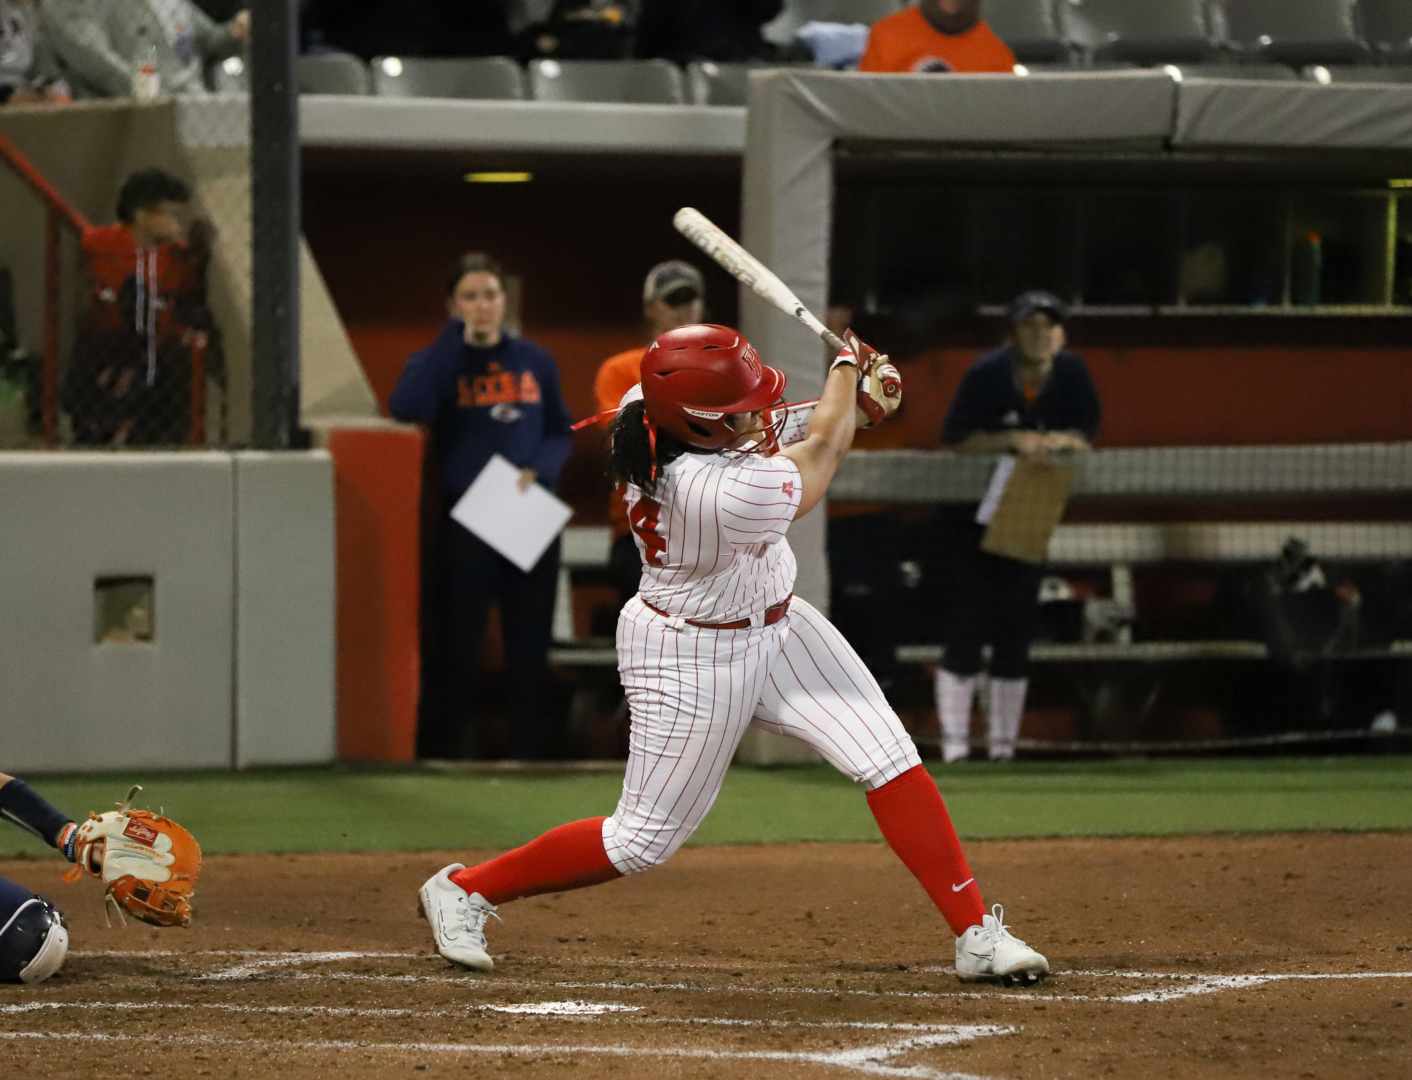 Junior infielder Britaney Shaw hit a walk-off grand slam in the ninth inning to split the double header for the Cougars against Boise State. | Sean Thomas/The Cougar